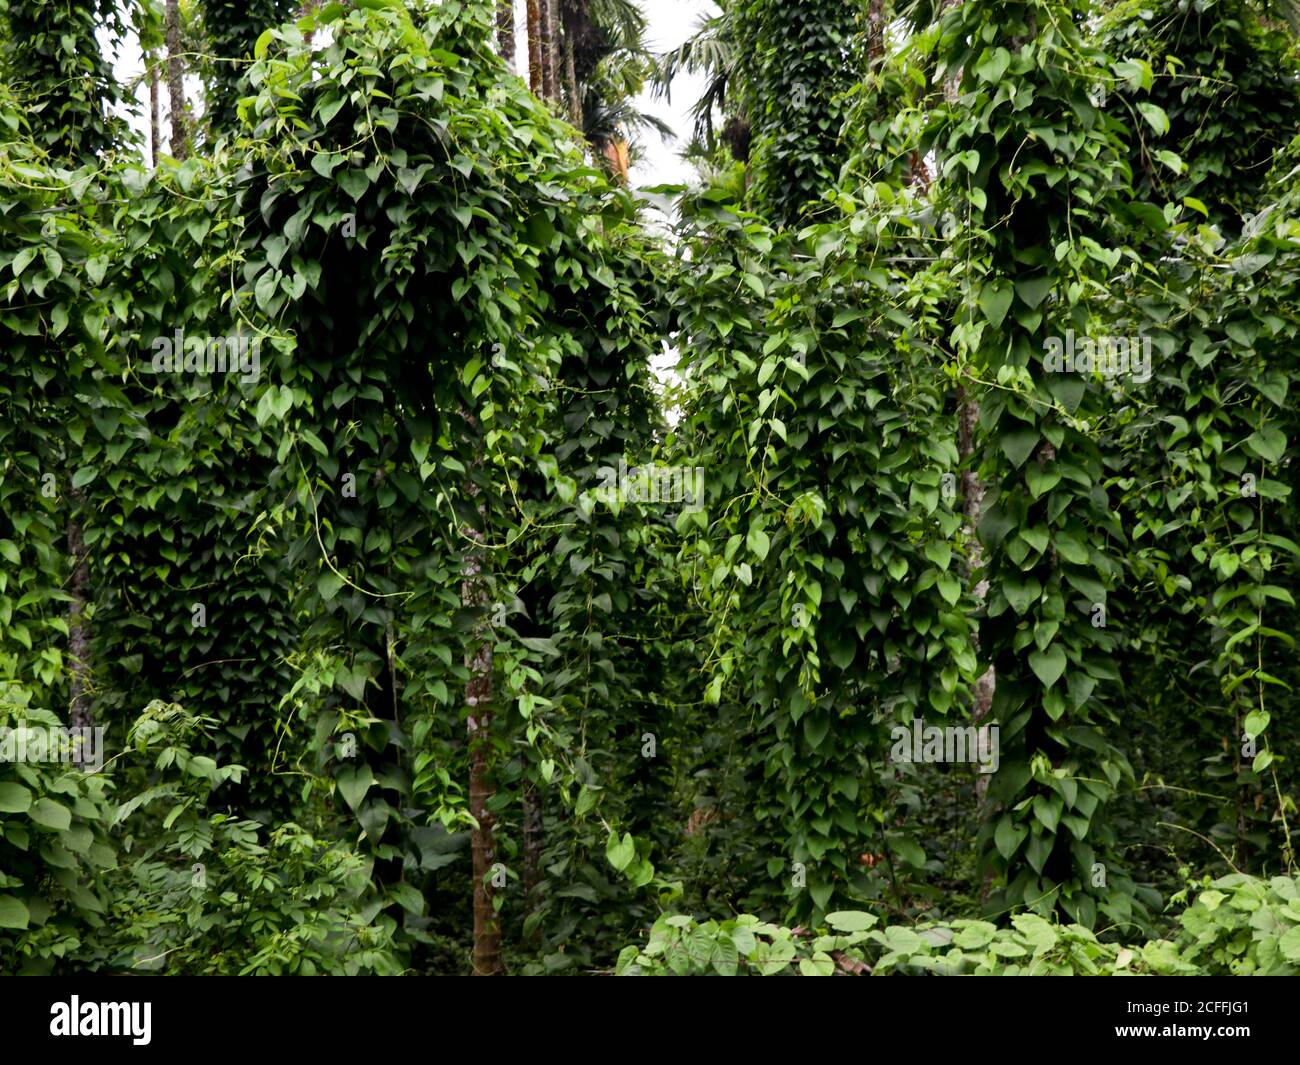 Cultivation of dioscorea alata known as purple yam or greater yam, organic farming Stock Photo